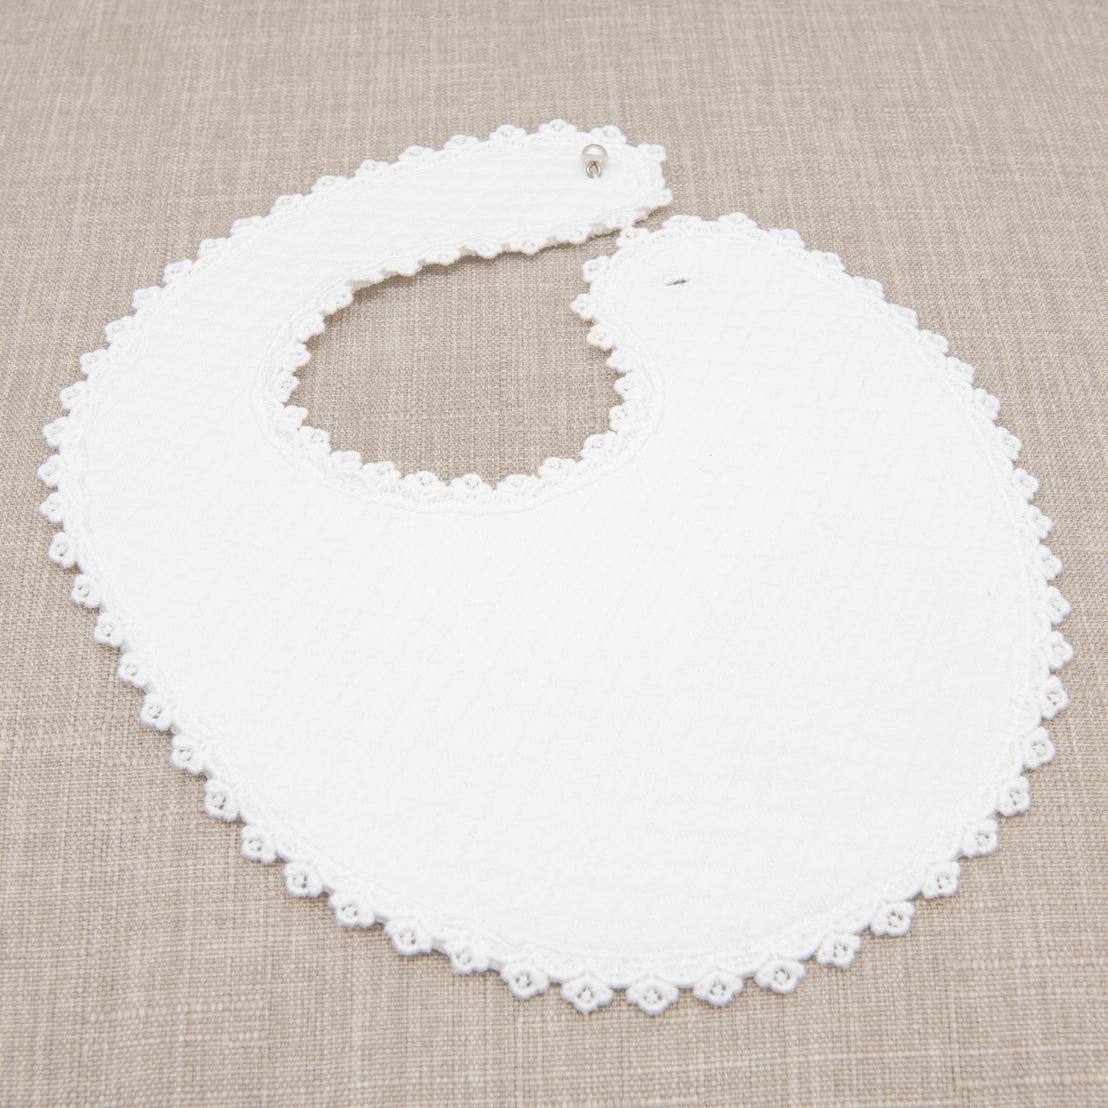 A Mila bib made from white quilted cotton with lace-edged scallop design and a pearl style button closure. The bib is displayed on a beige fabric background.